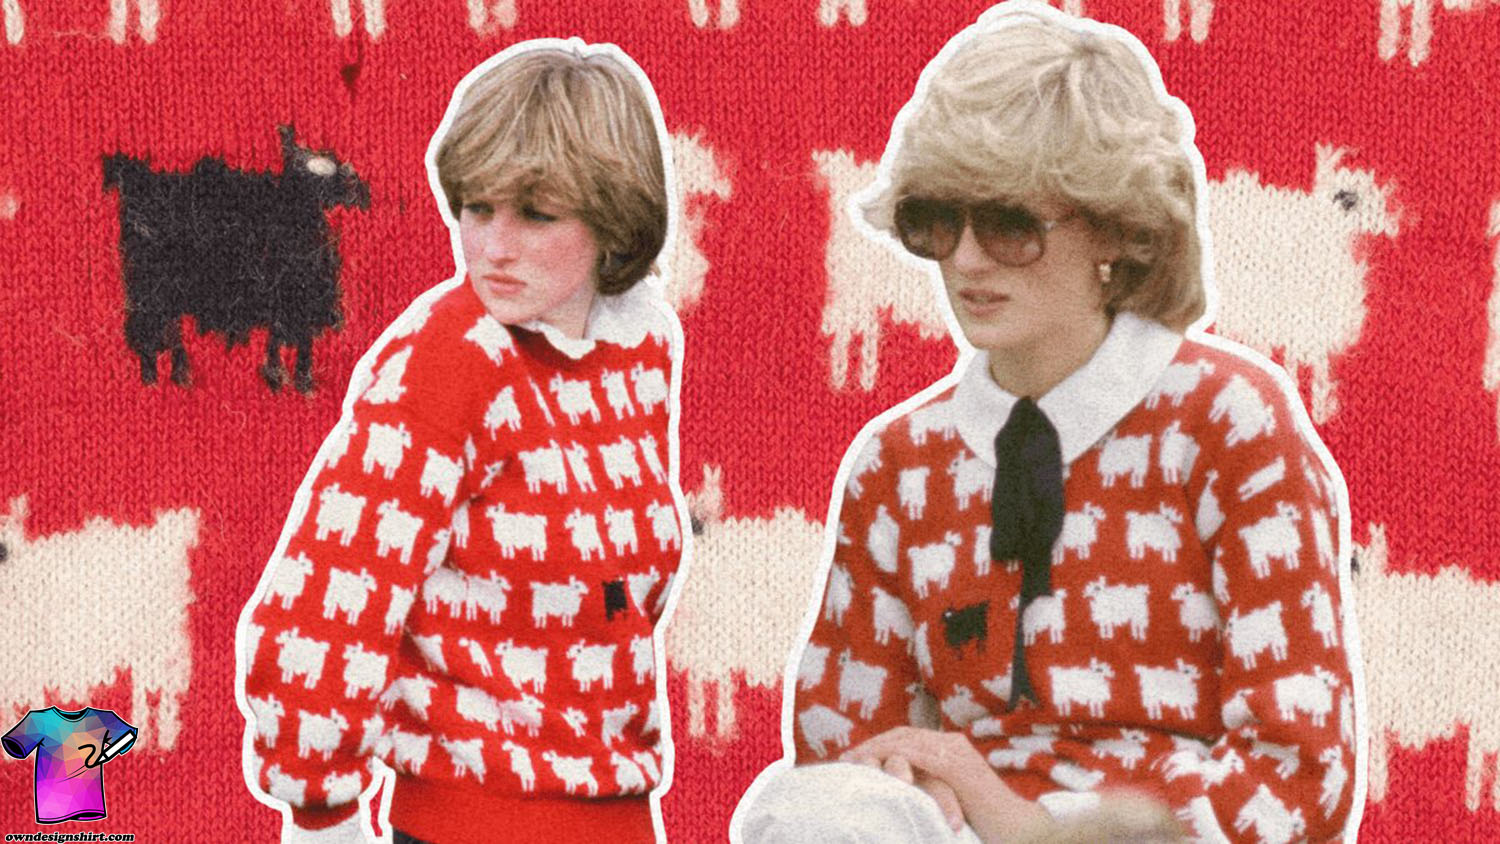 Diana, The People's Princess The Story Behind the Iconic Diana Sweater Auction